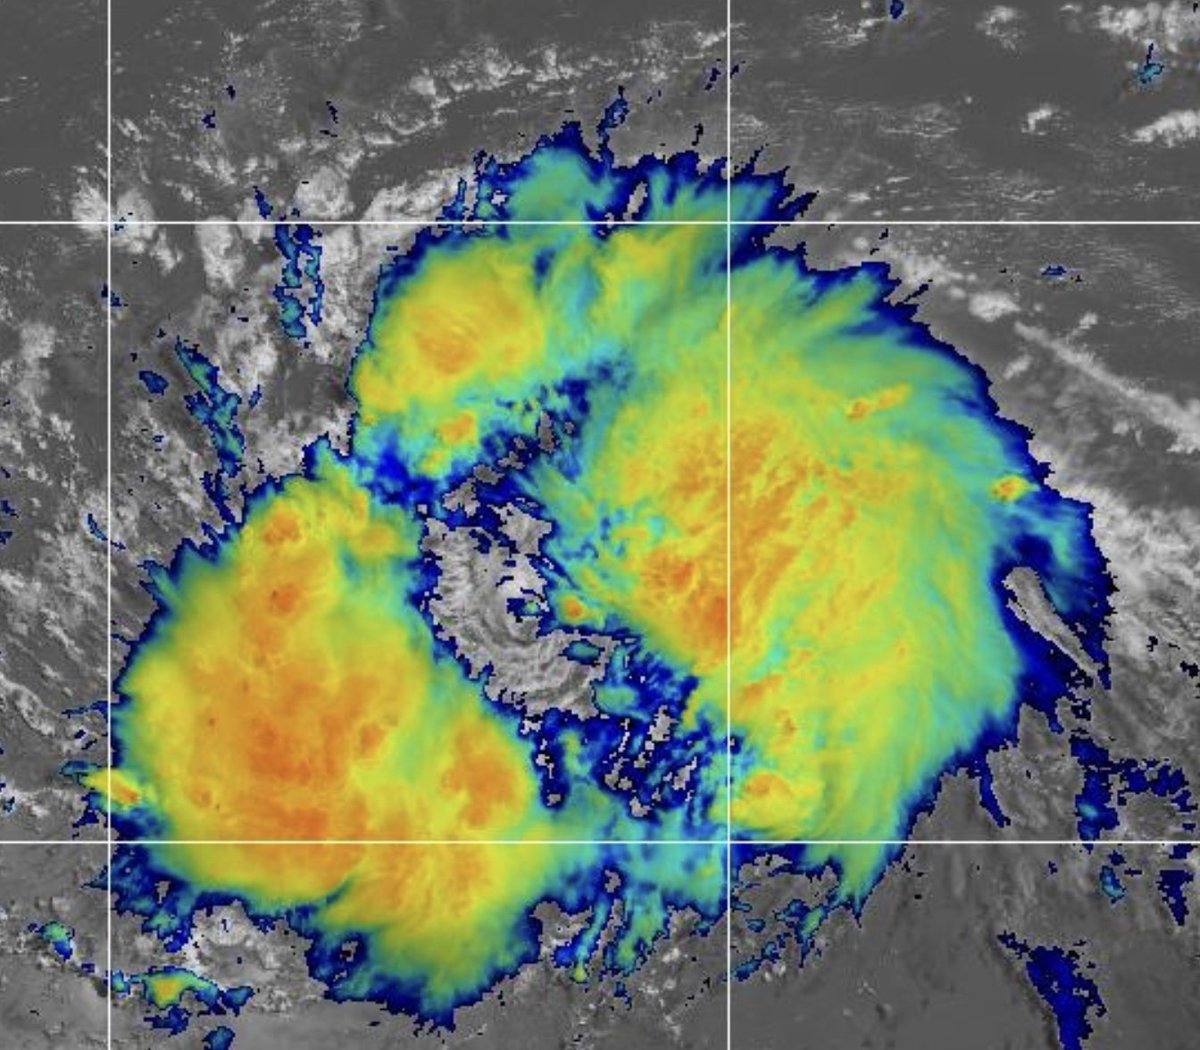 Bret center is not under the convection but between the 2 clusters